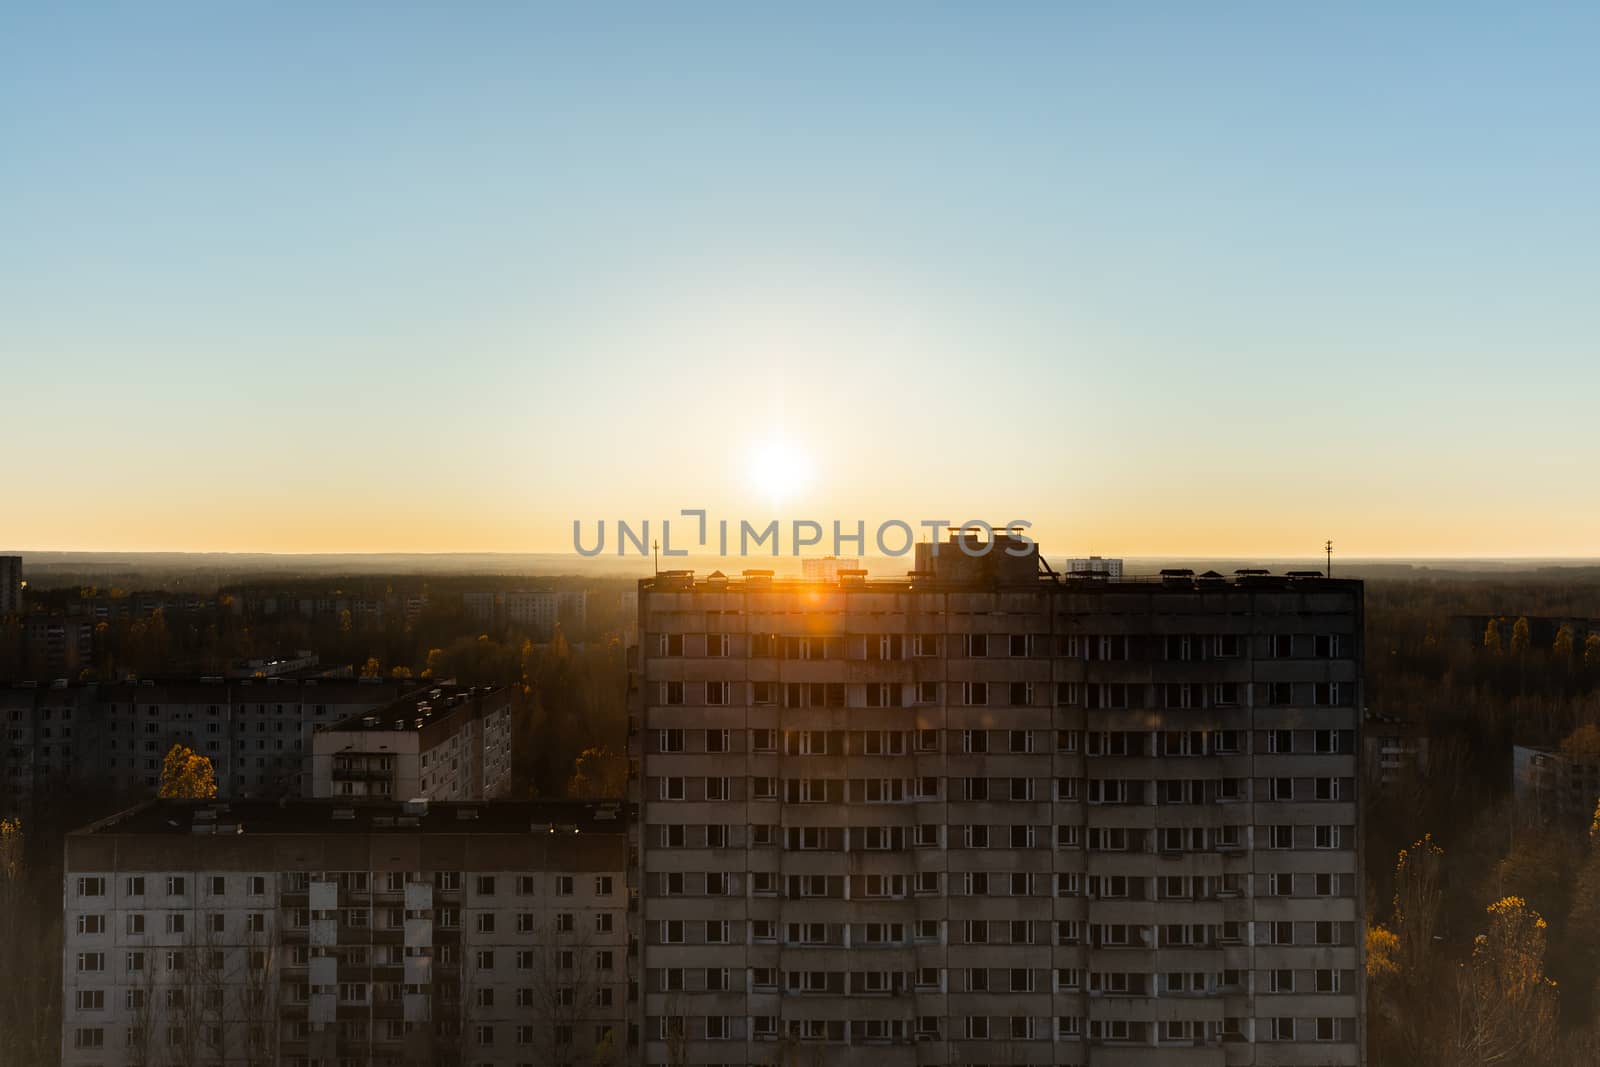 An Abandoned high rise in Pripyat, Chernobyl Exclusion Zone 2019